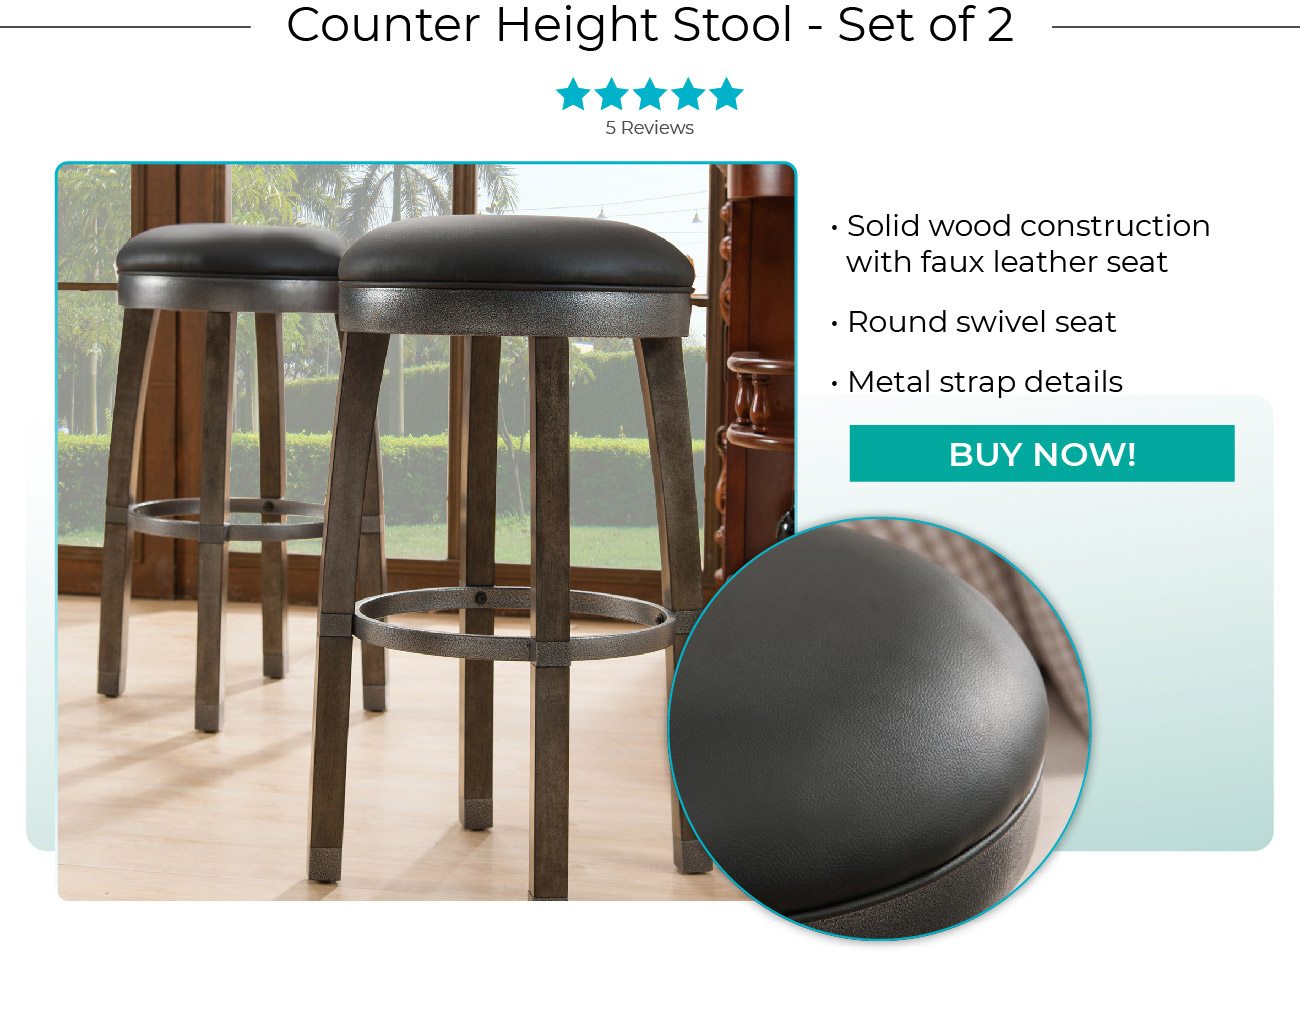 Counter Height Stool - Set of 2